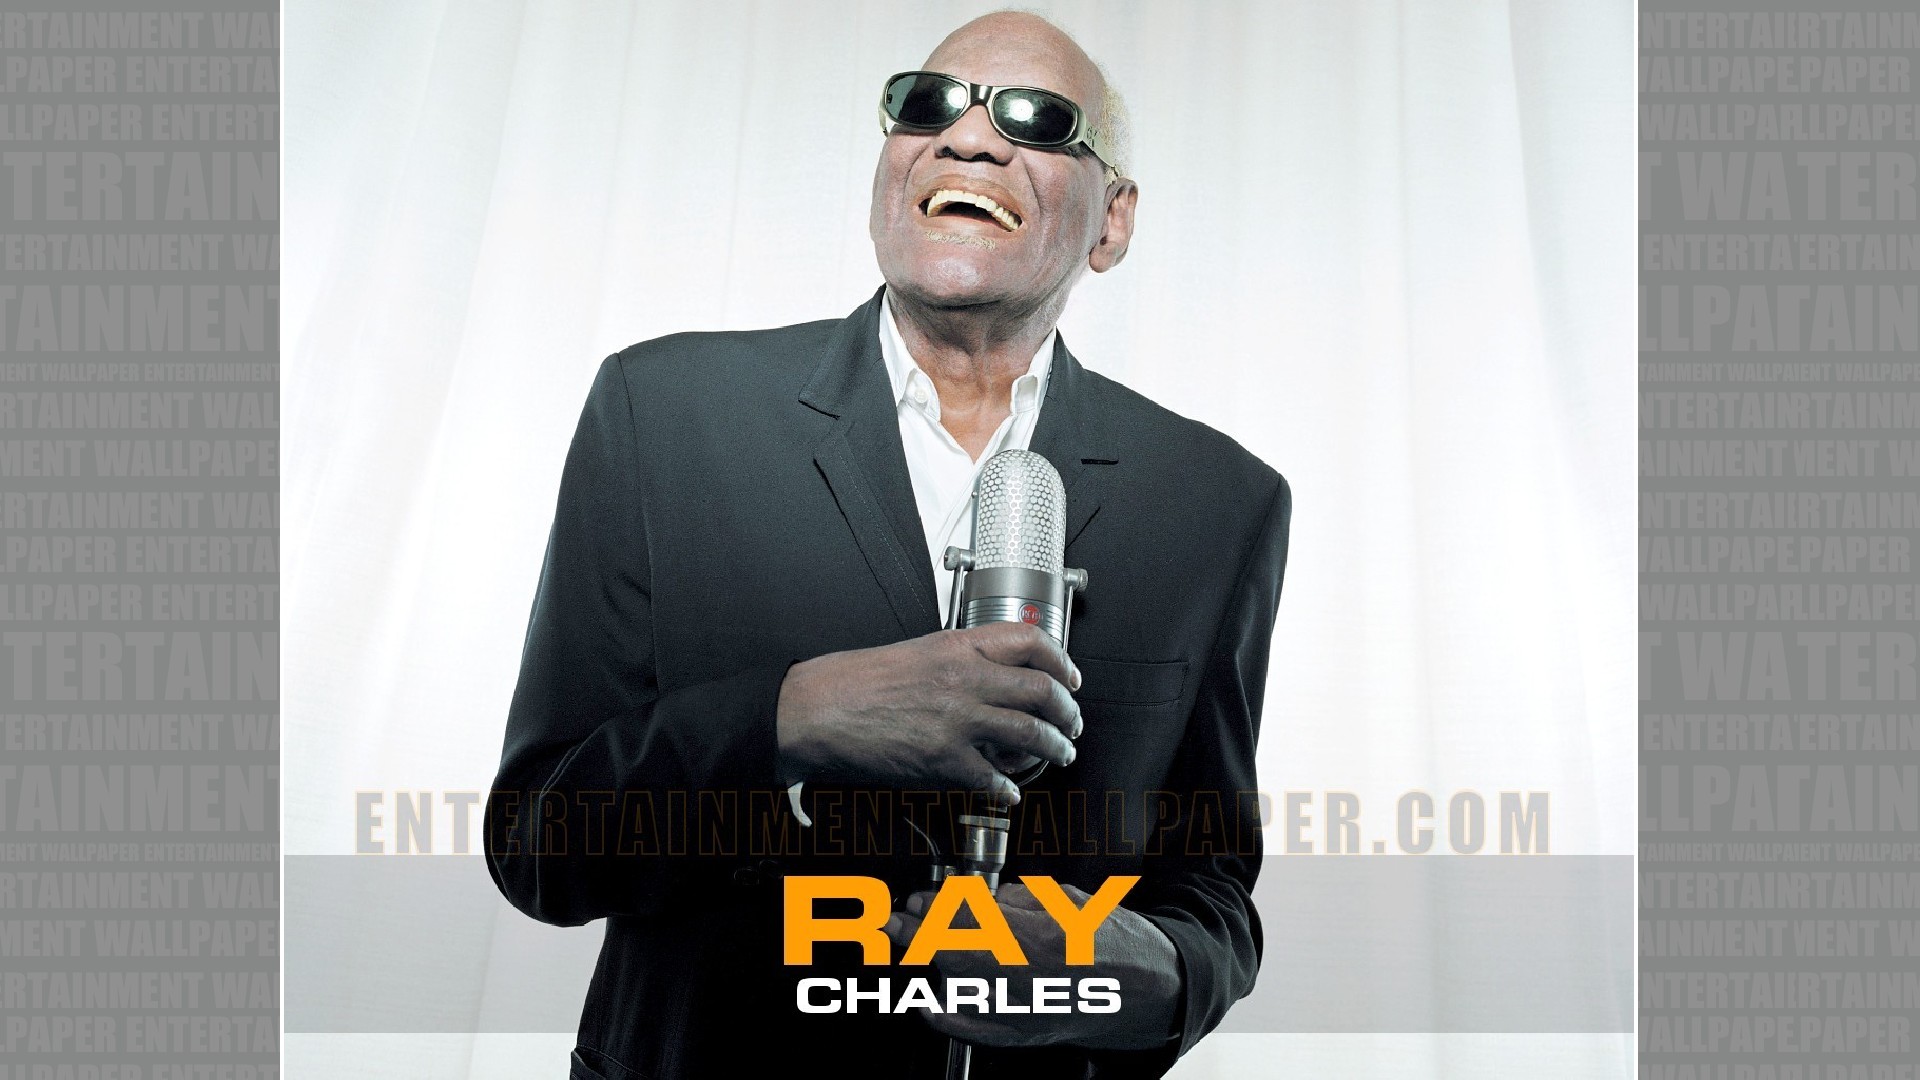 images-of-charles-ray-actor